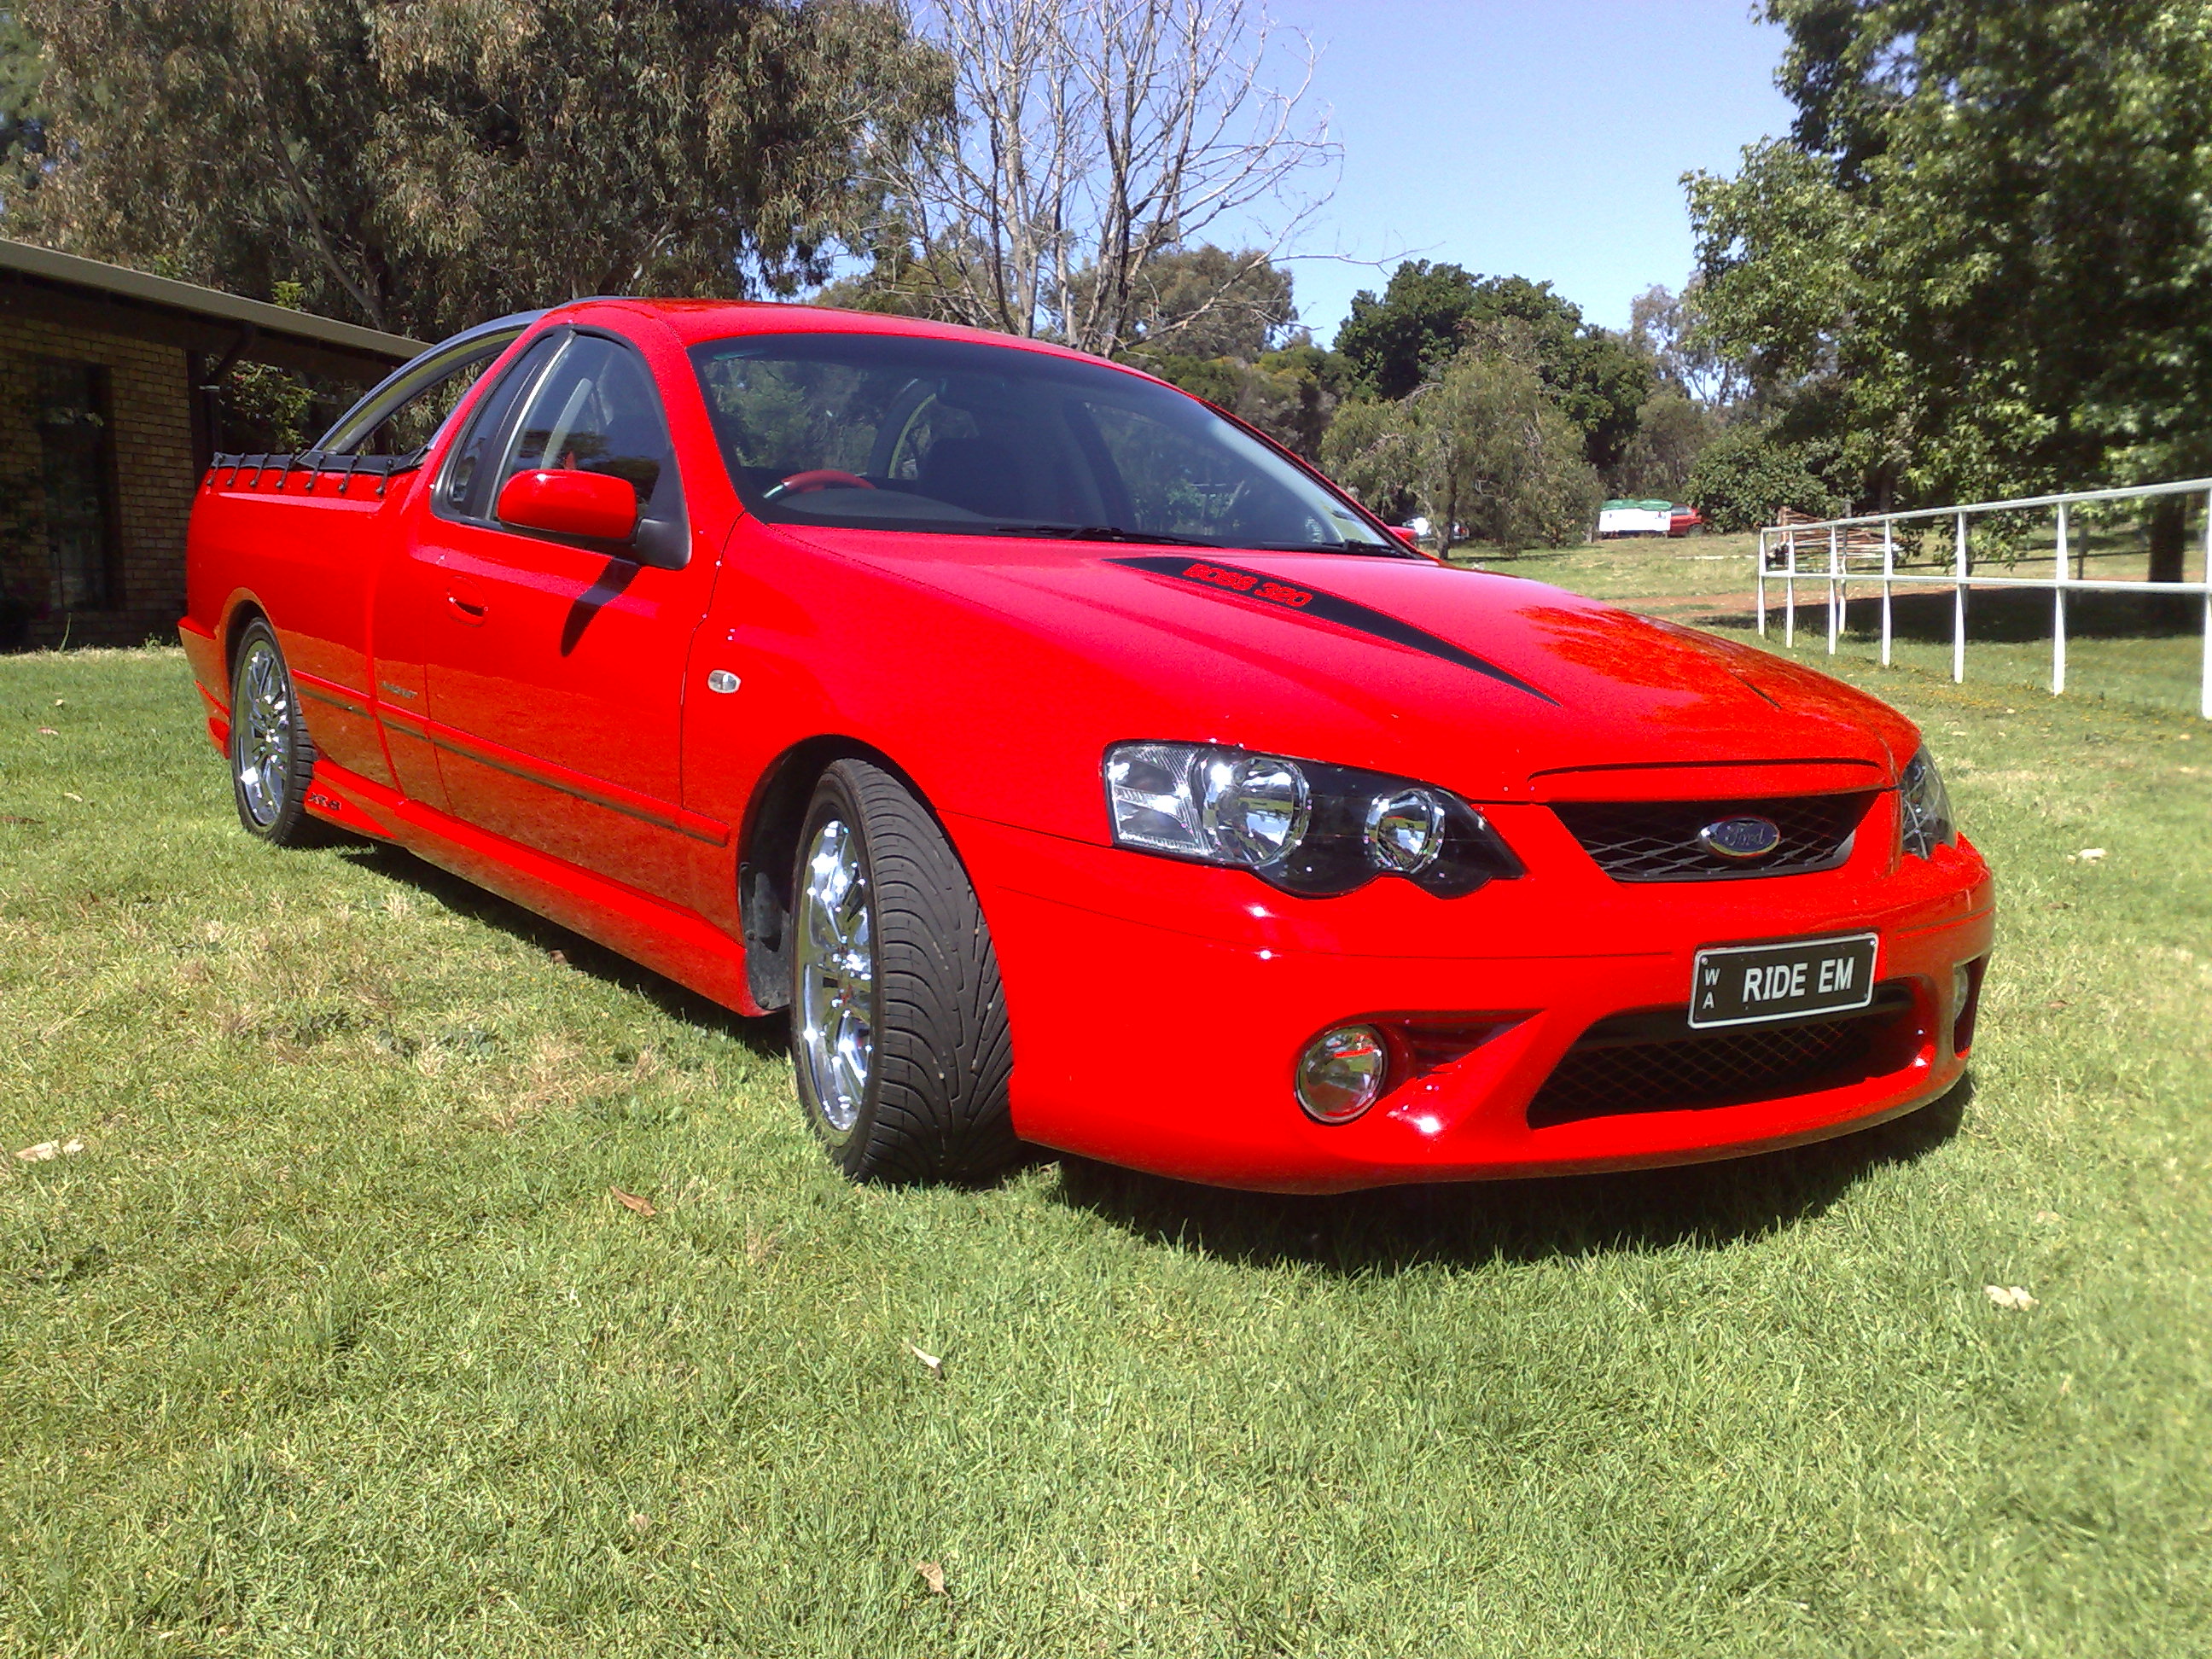 Ford falcon xr8 ute review #5